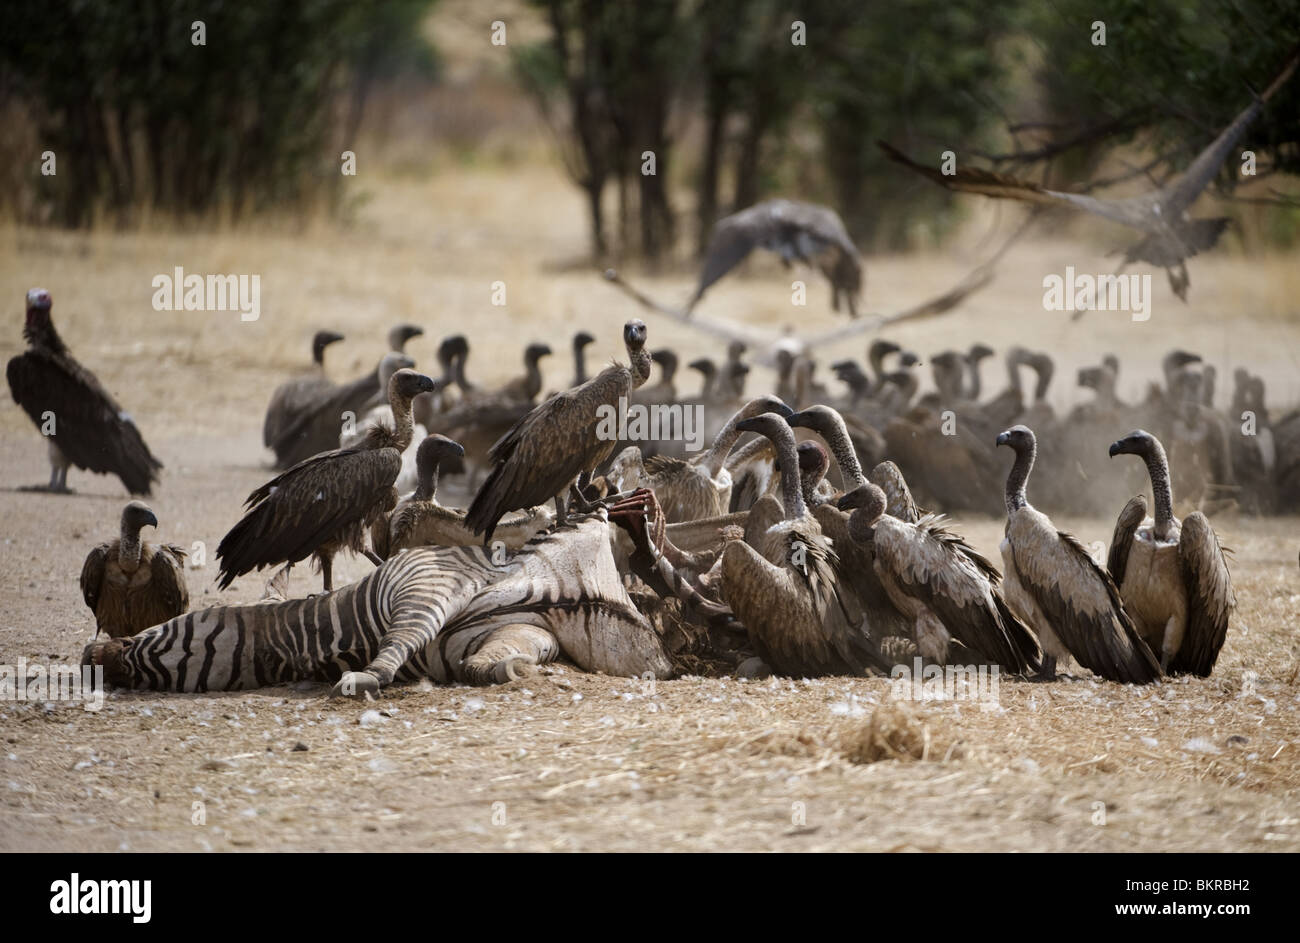 Vultures around a zebra carcass killed by lions the night before, Hobatere, Damaraland, northern Namibia. Stock Photo